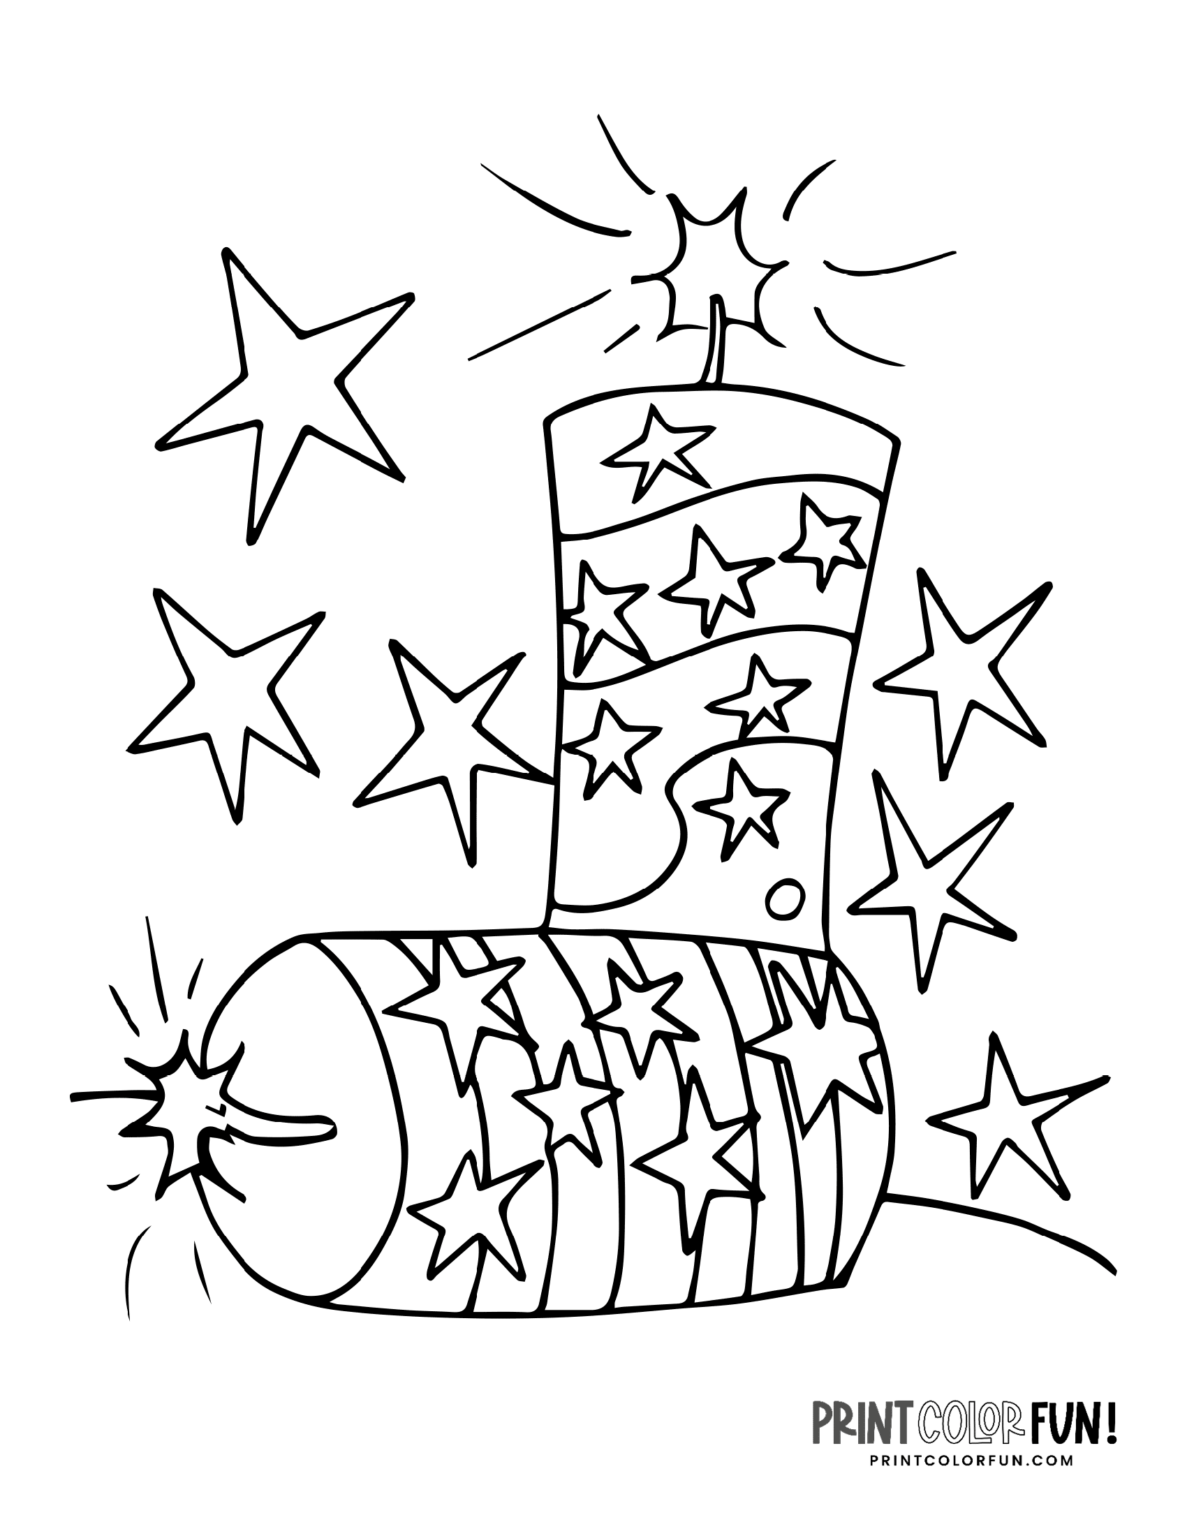 Firecracker & fireworks coloring pages: Celebrate with free printables